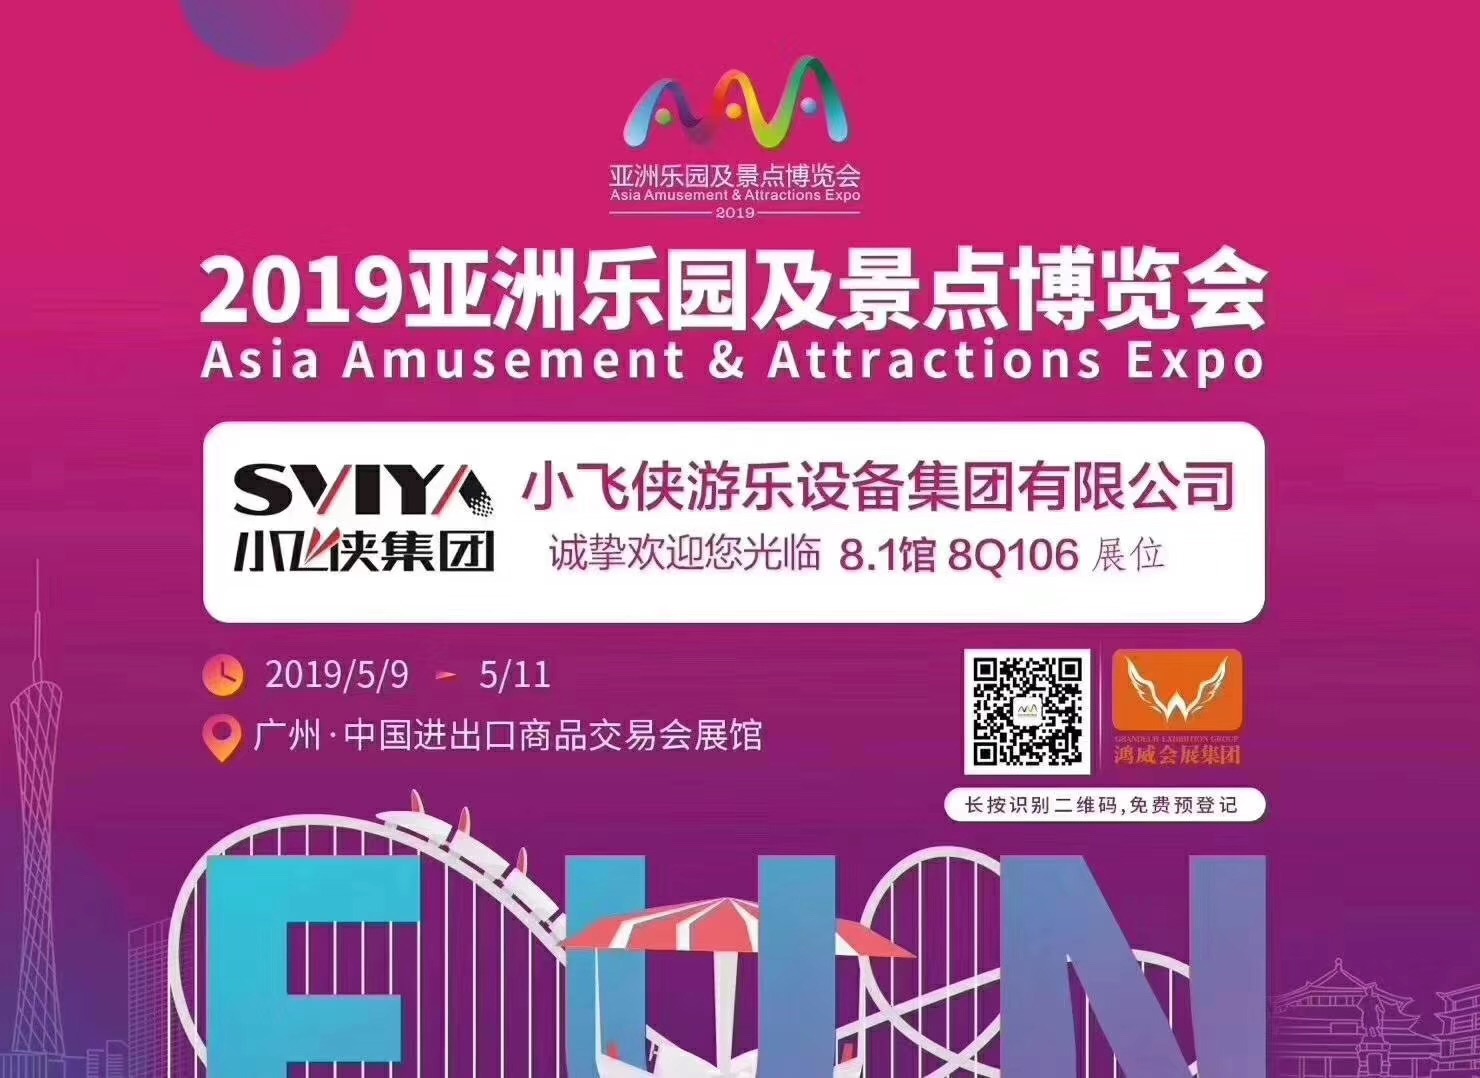 Asia Amusement & Attractions Expo 2019